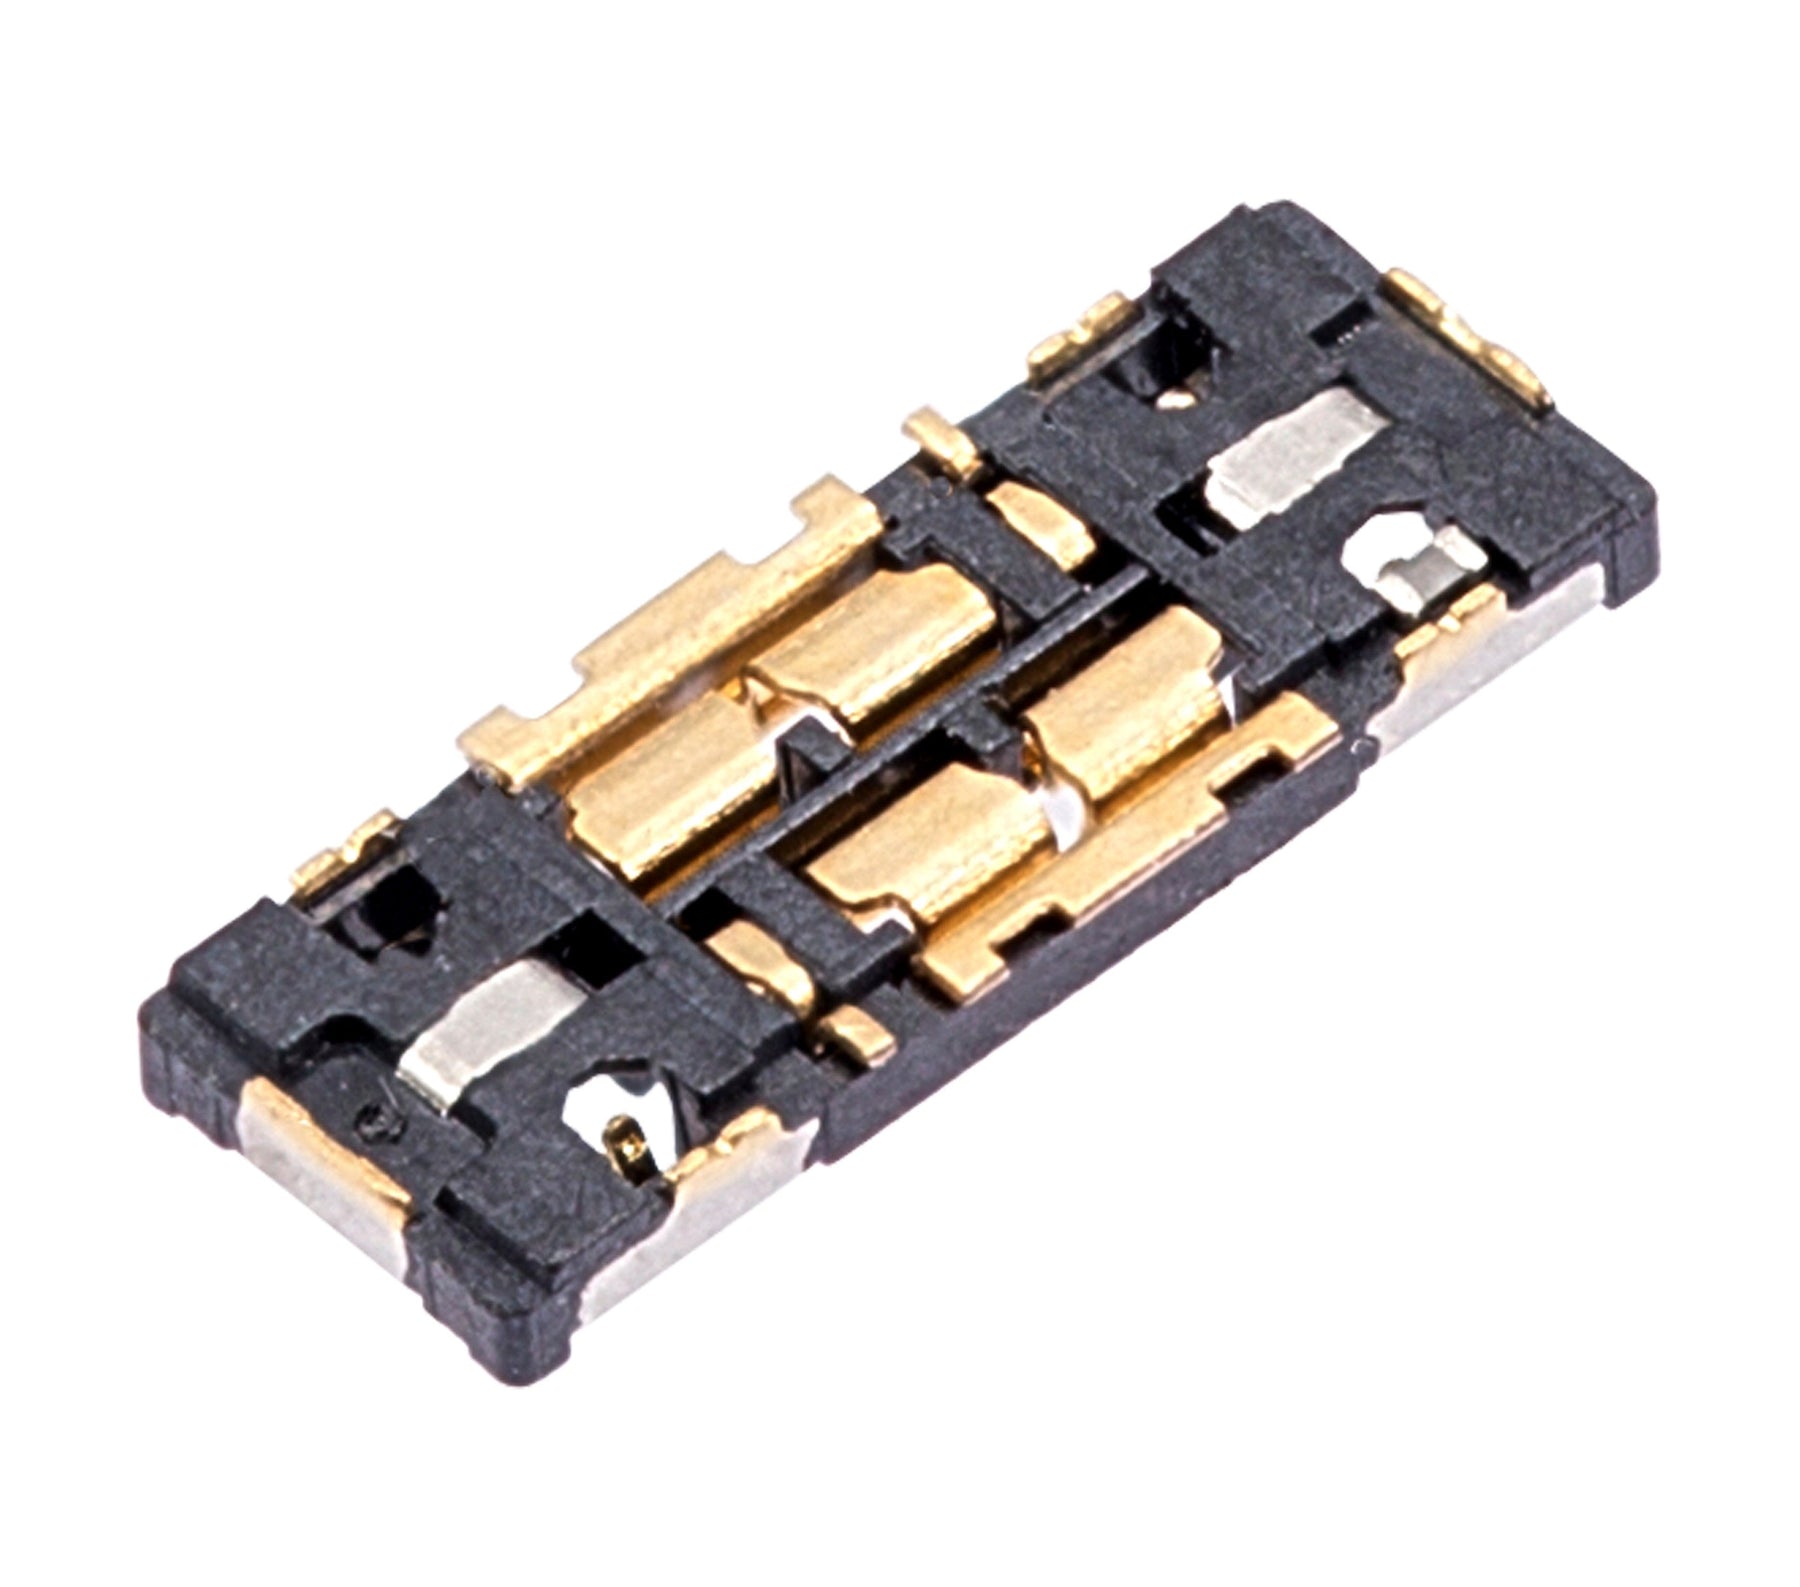 BATTERY FPC CONNECTOR (ON MOTHERBOARD) COMPATIBLE WITH IPHONE 12 / 12 MINI / 12 PRO / 12 PRO MAX